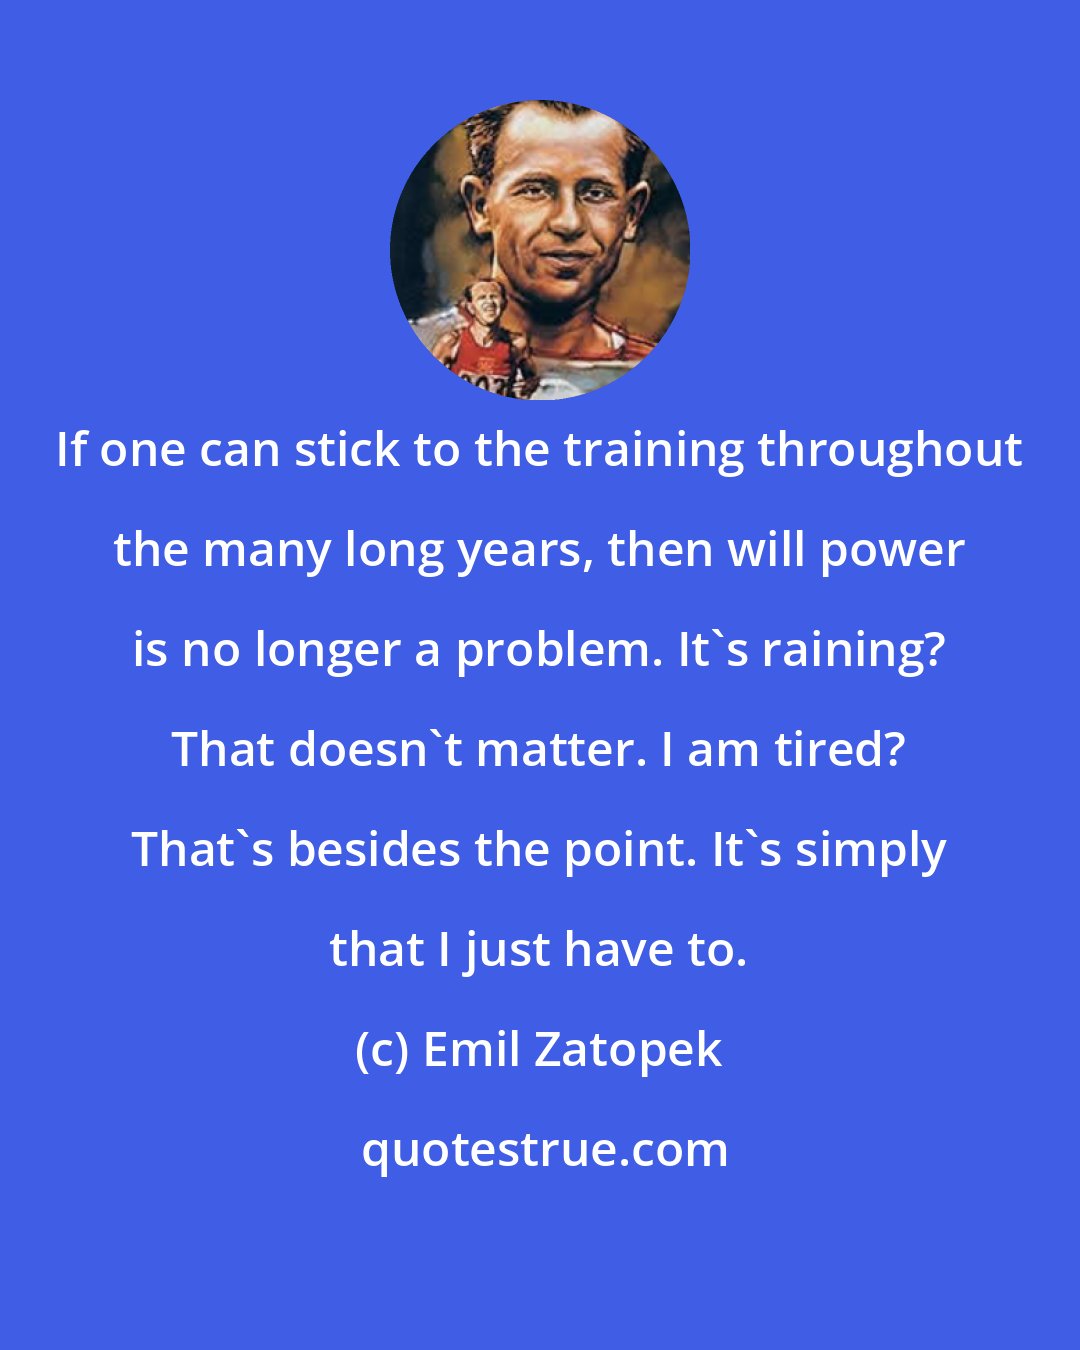 Emil Zatopek: If one can stick to the training throughout the many long years, then will power is no longer a problem. It's raining? That doesn't matter. I am tired? That's besides the point. It's simply that I just have to.